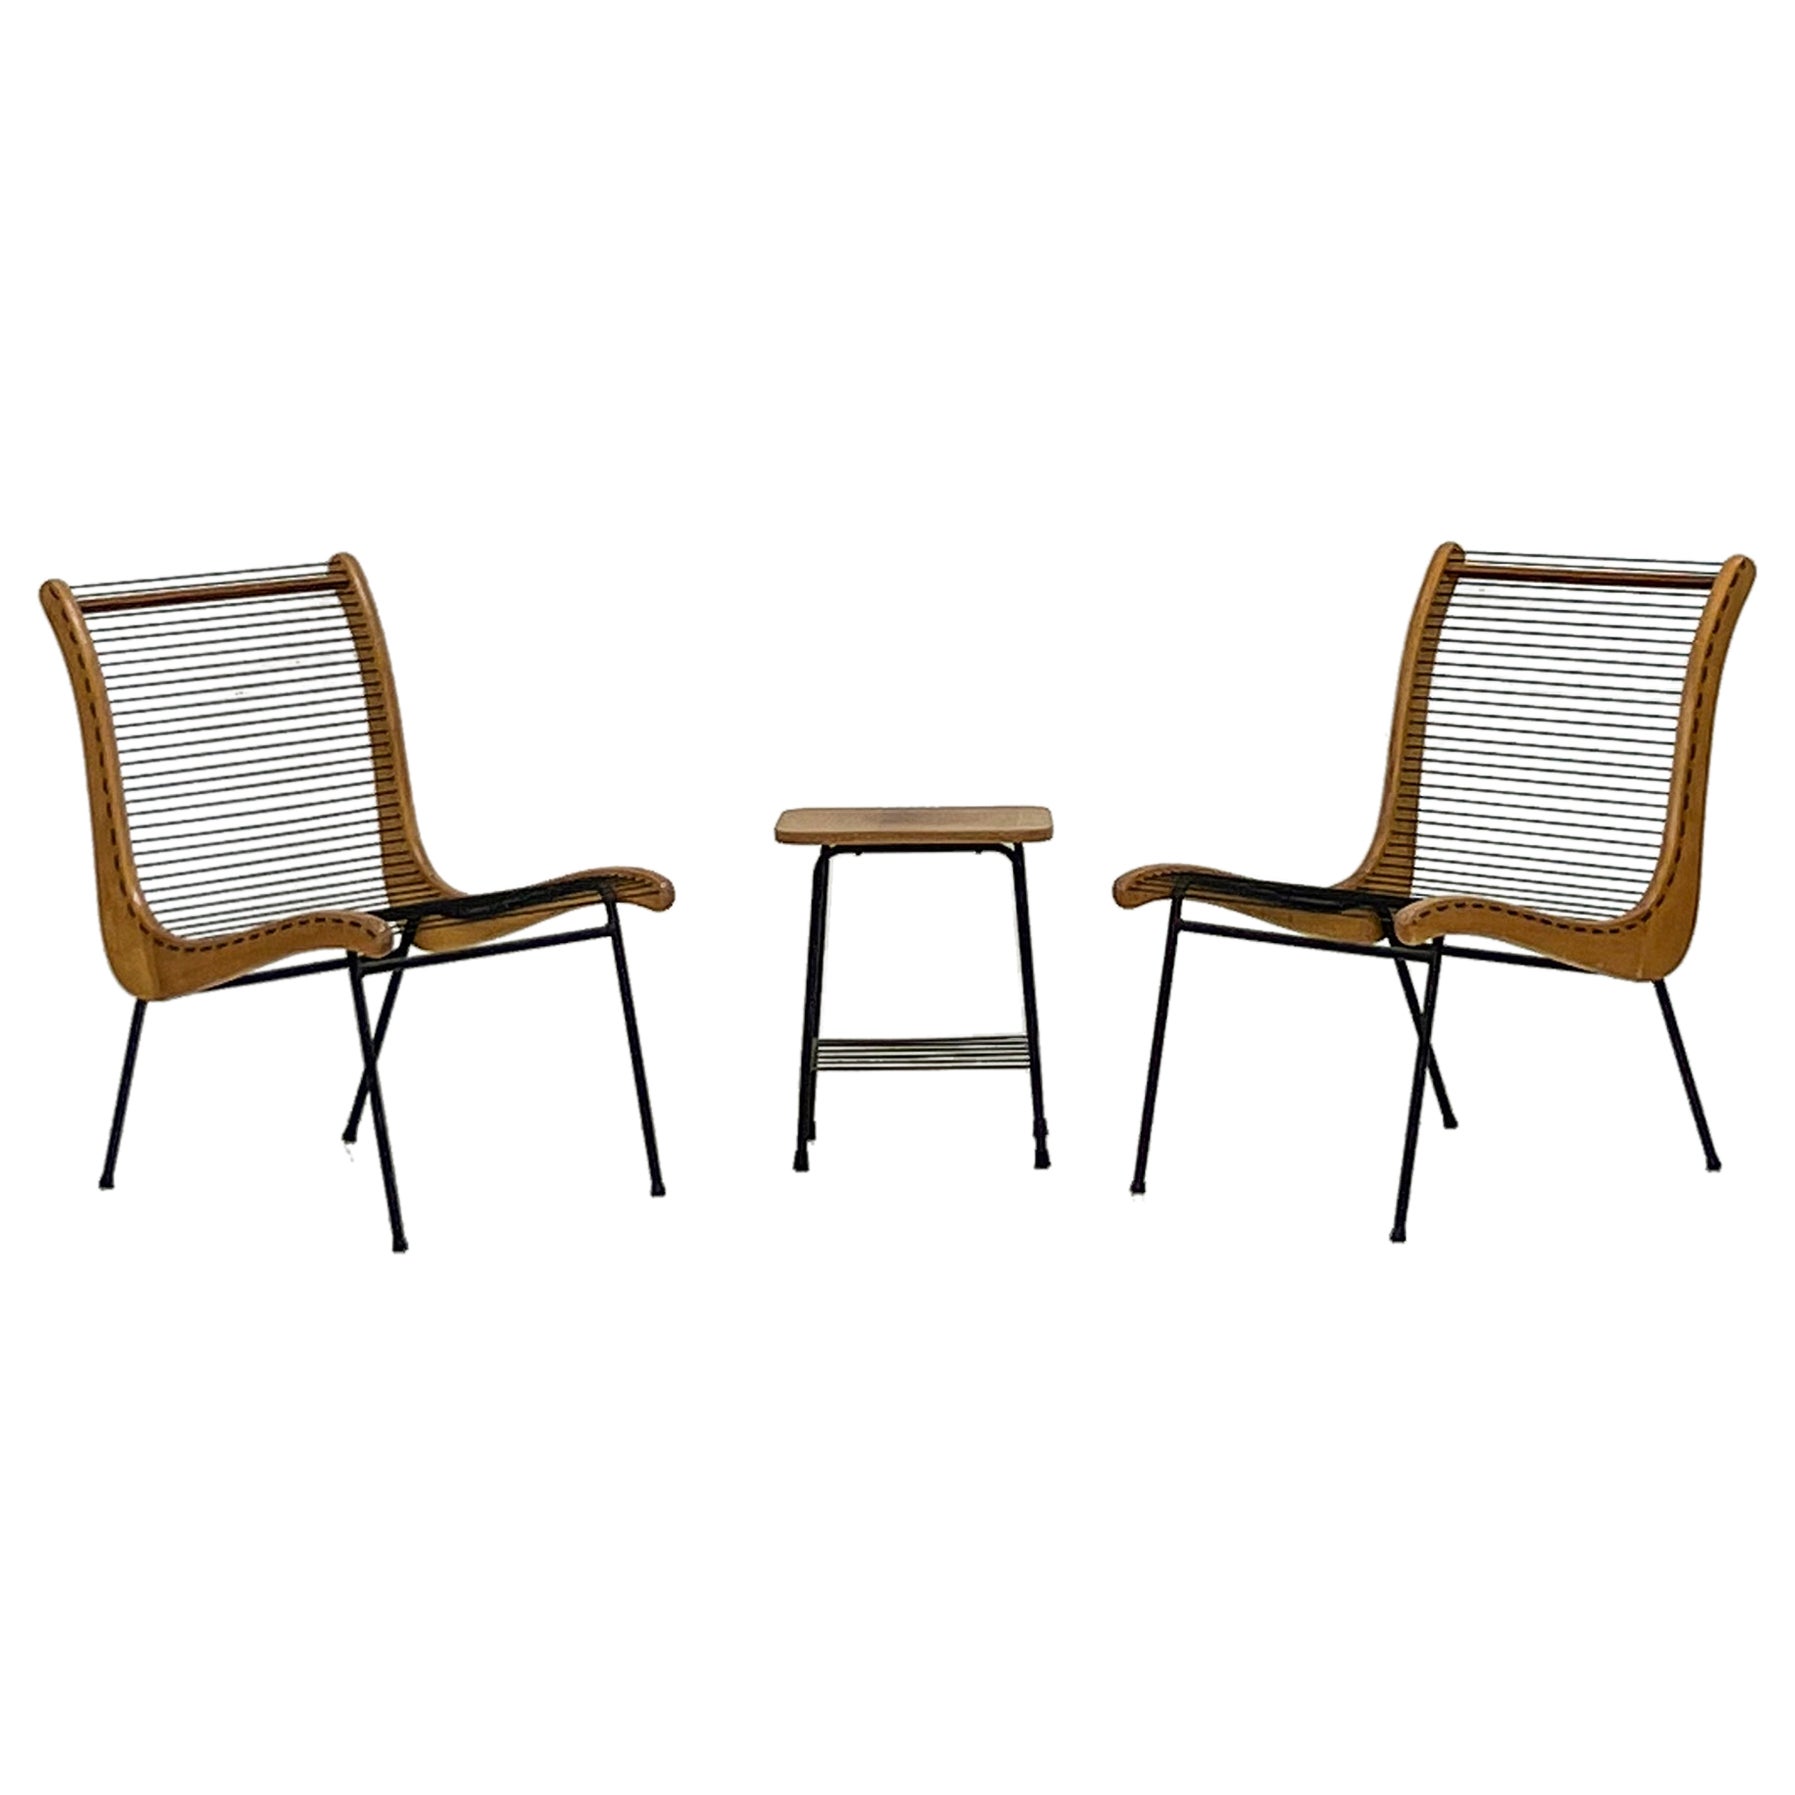 String Chairs With Matching Table by Carl Koch, Vermont Tubbs, 1950's For Sale